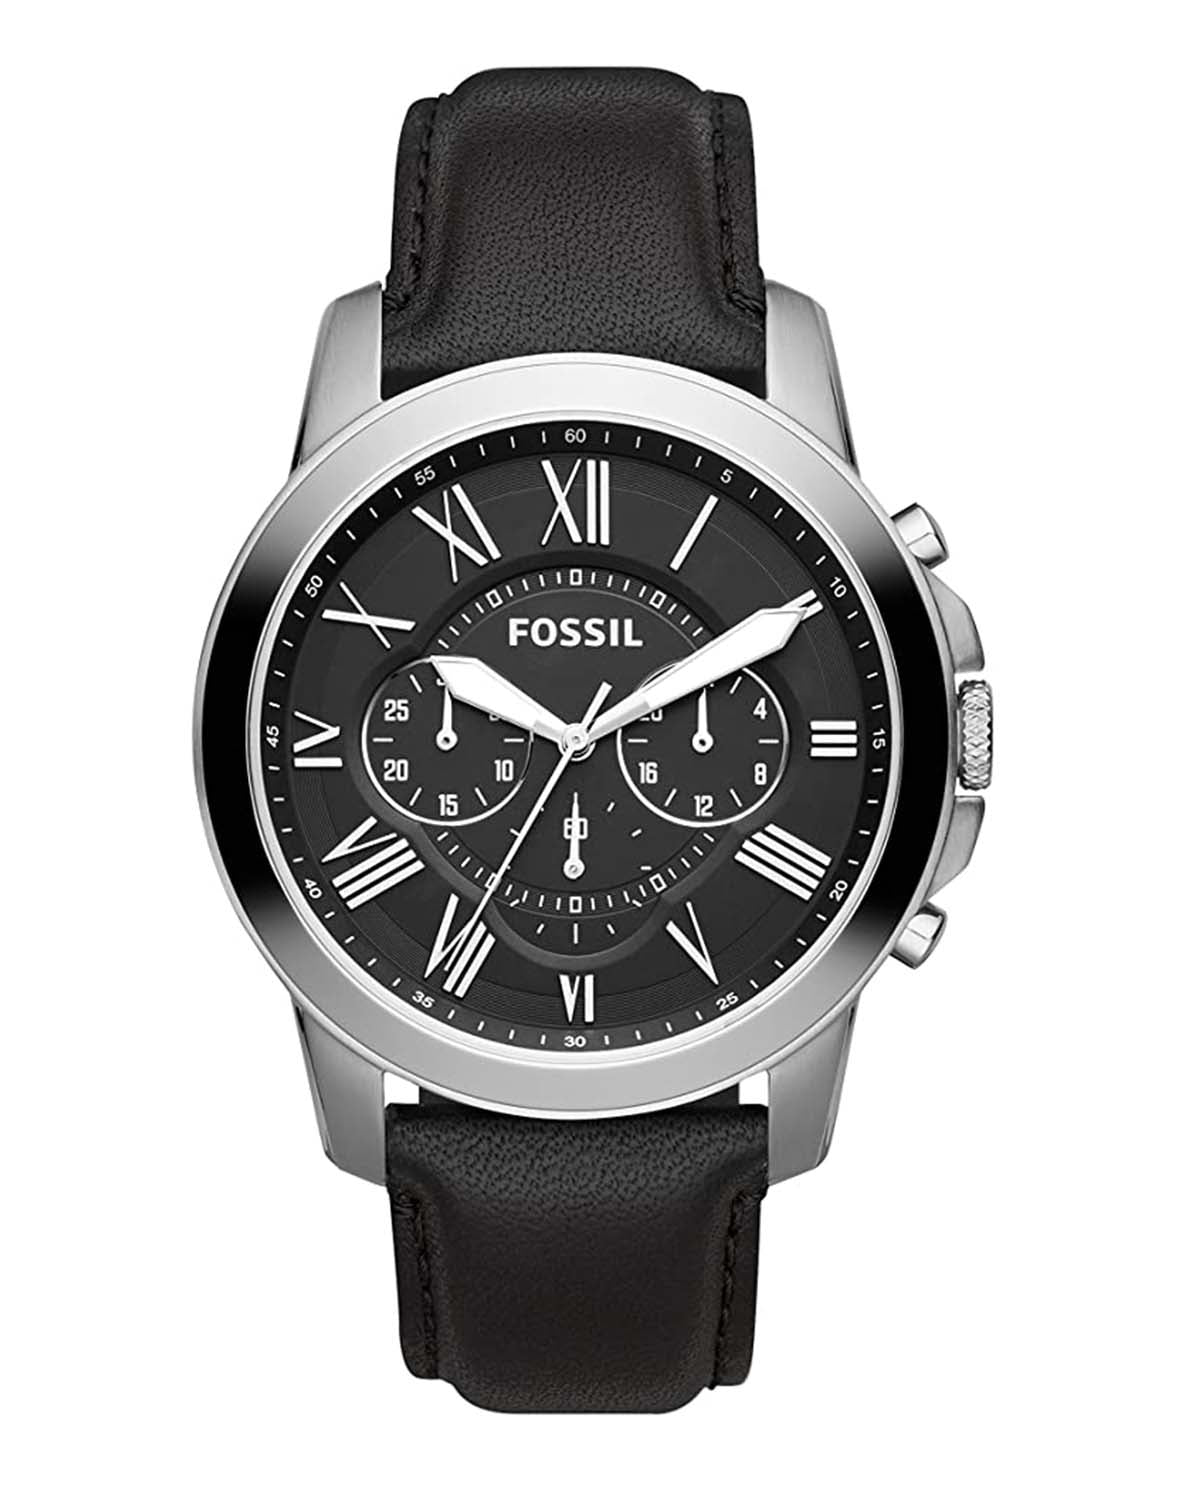 Fossil Grant Chronograph Black Leather Mens Watch